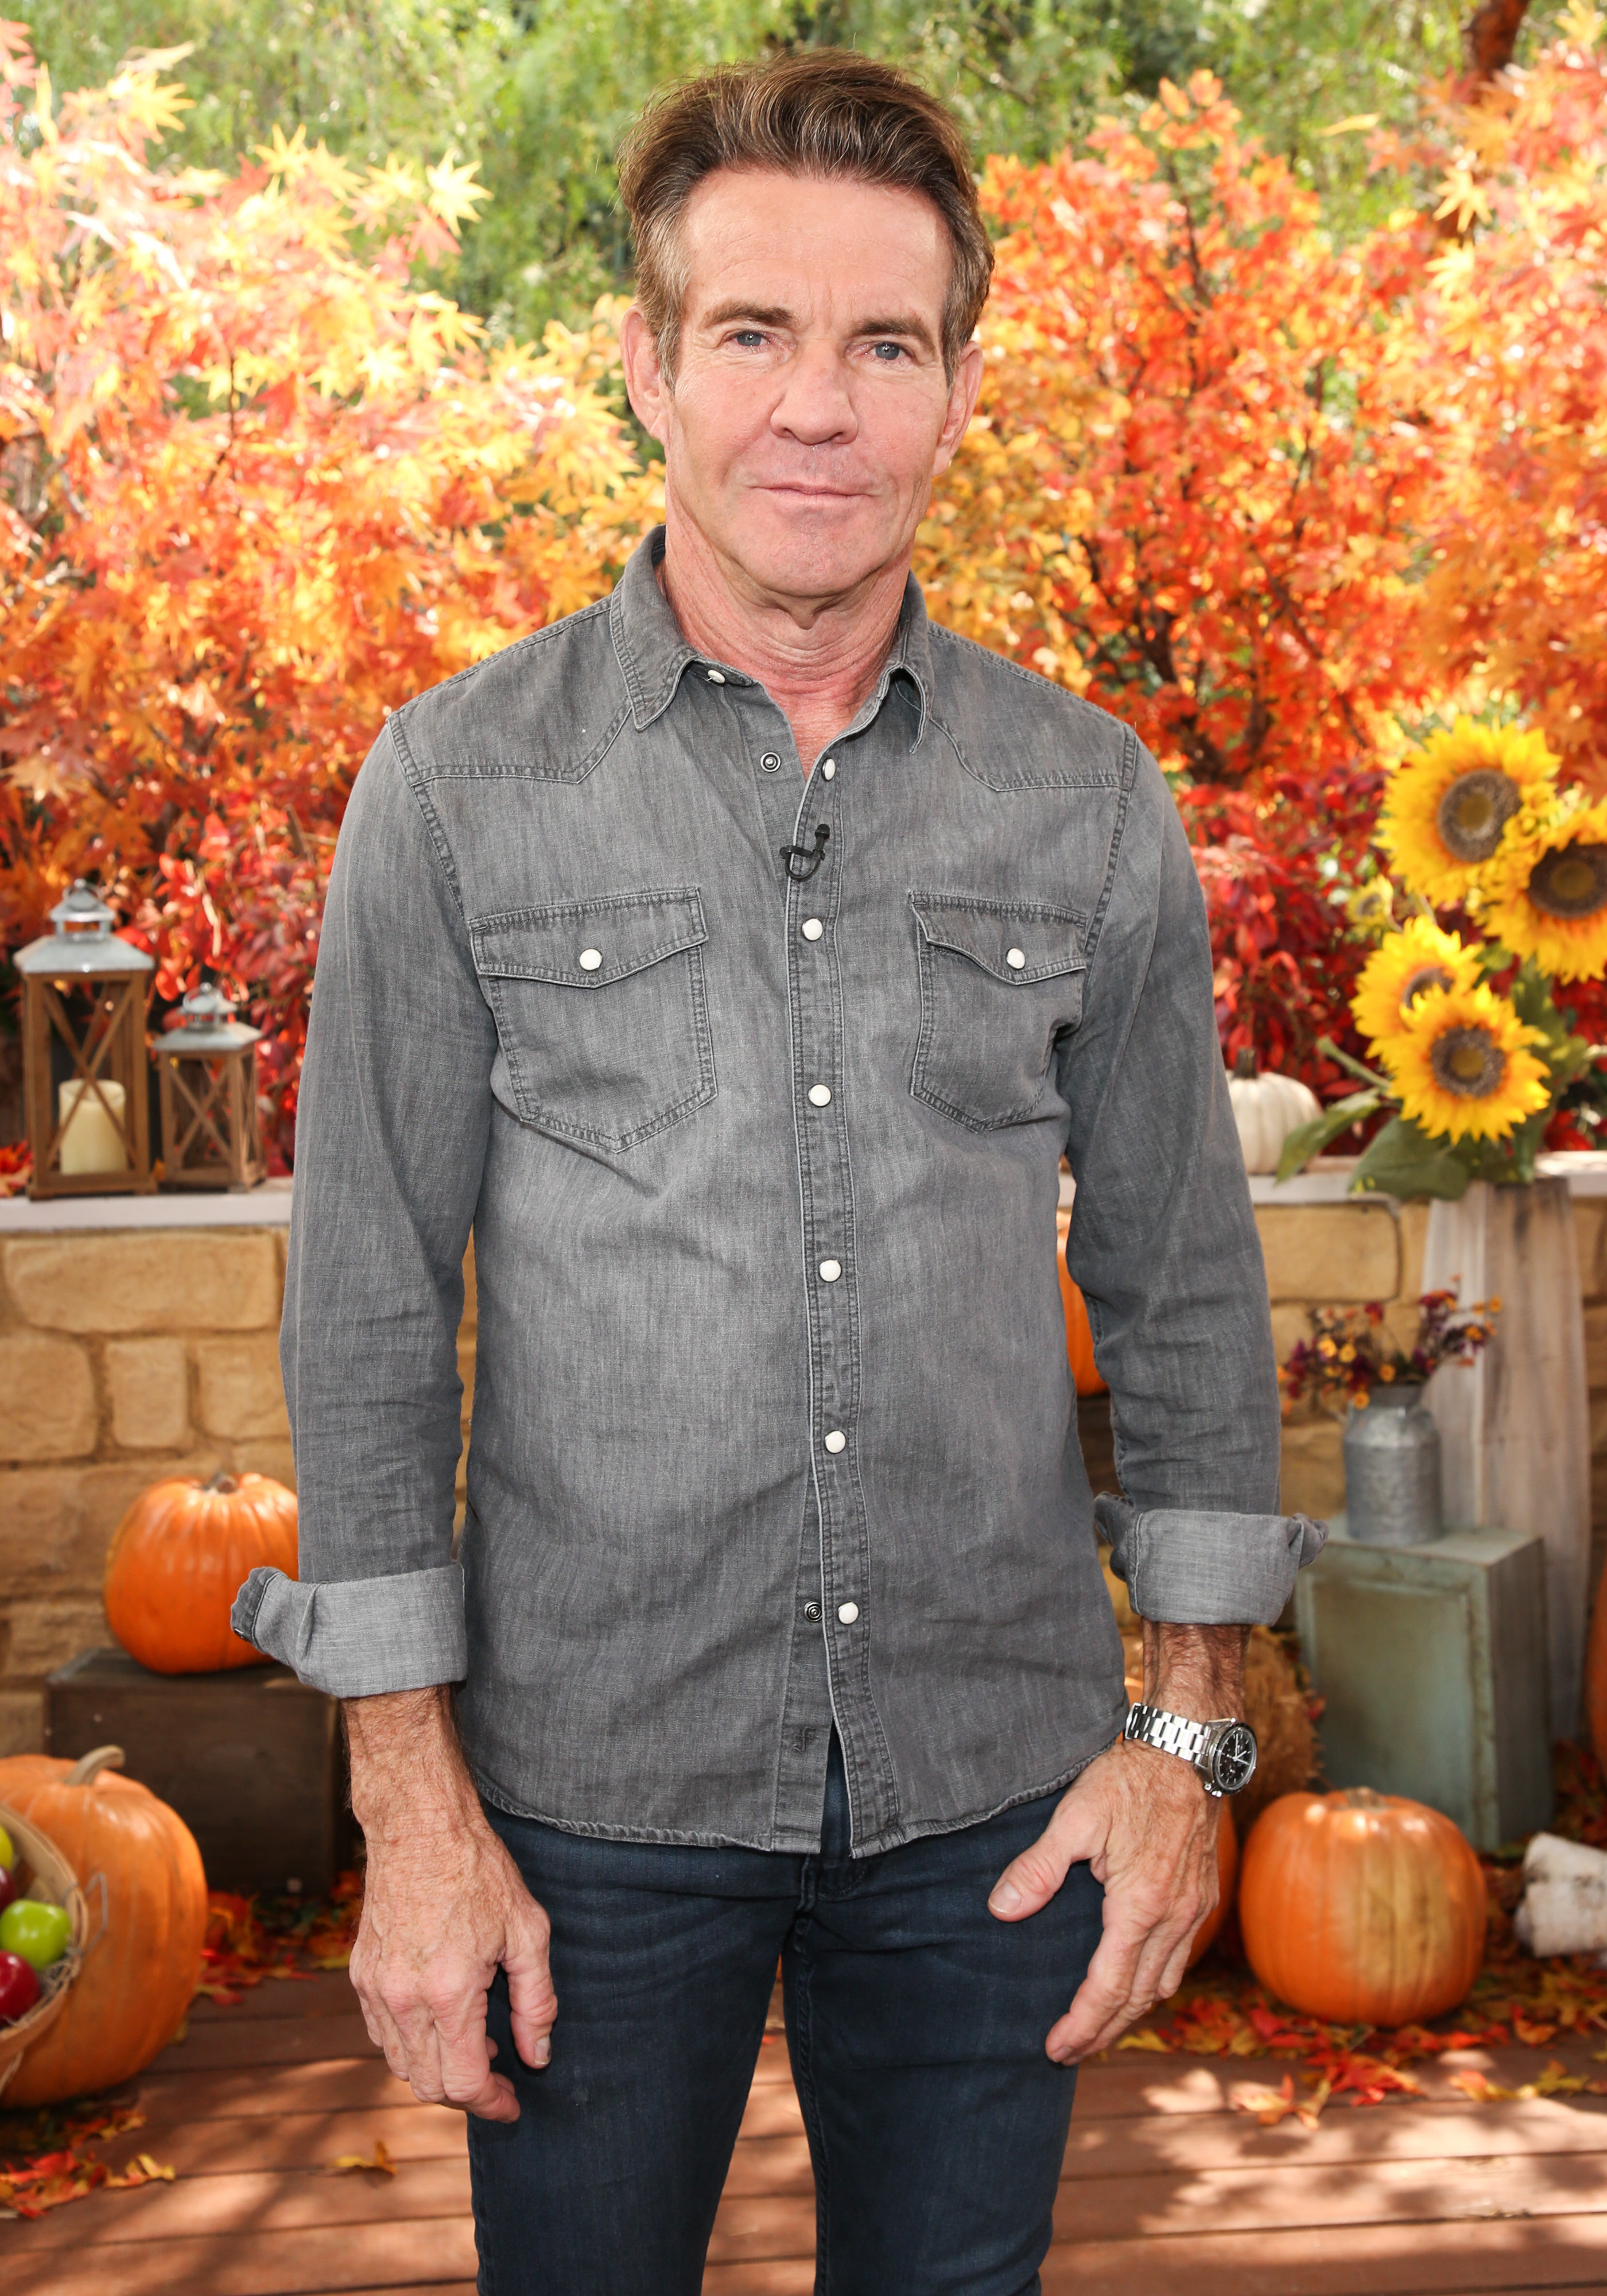 Dennis in a denim shirt and jeans at the home and family show for hallmark channel